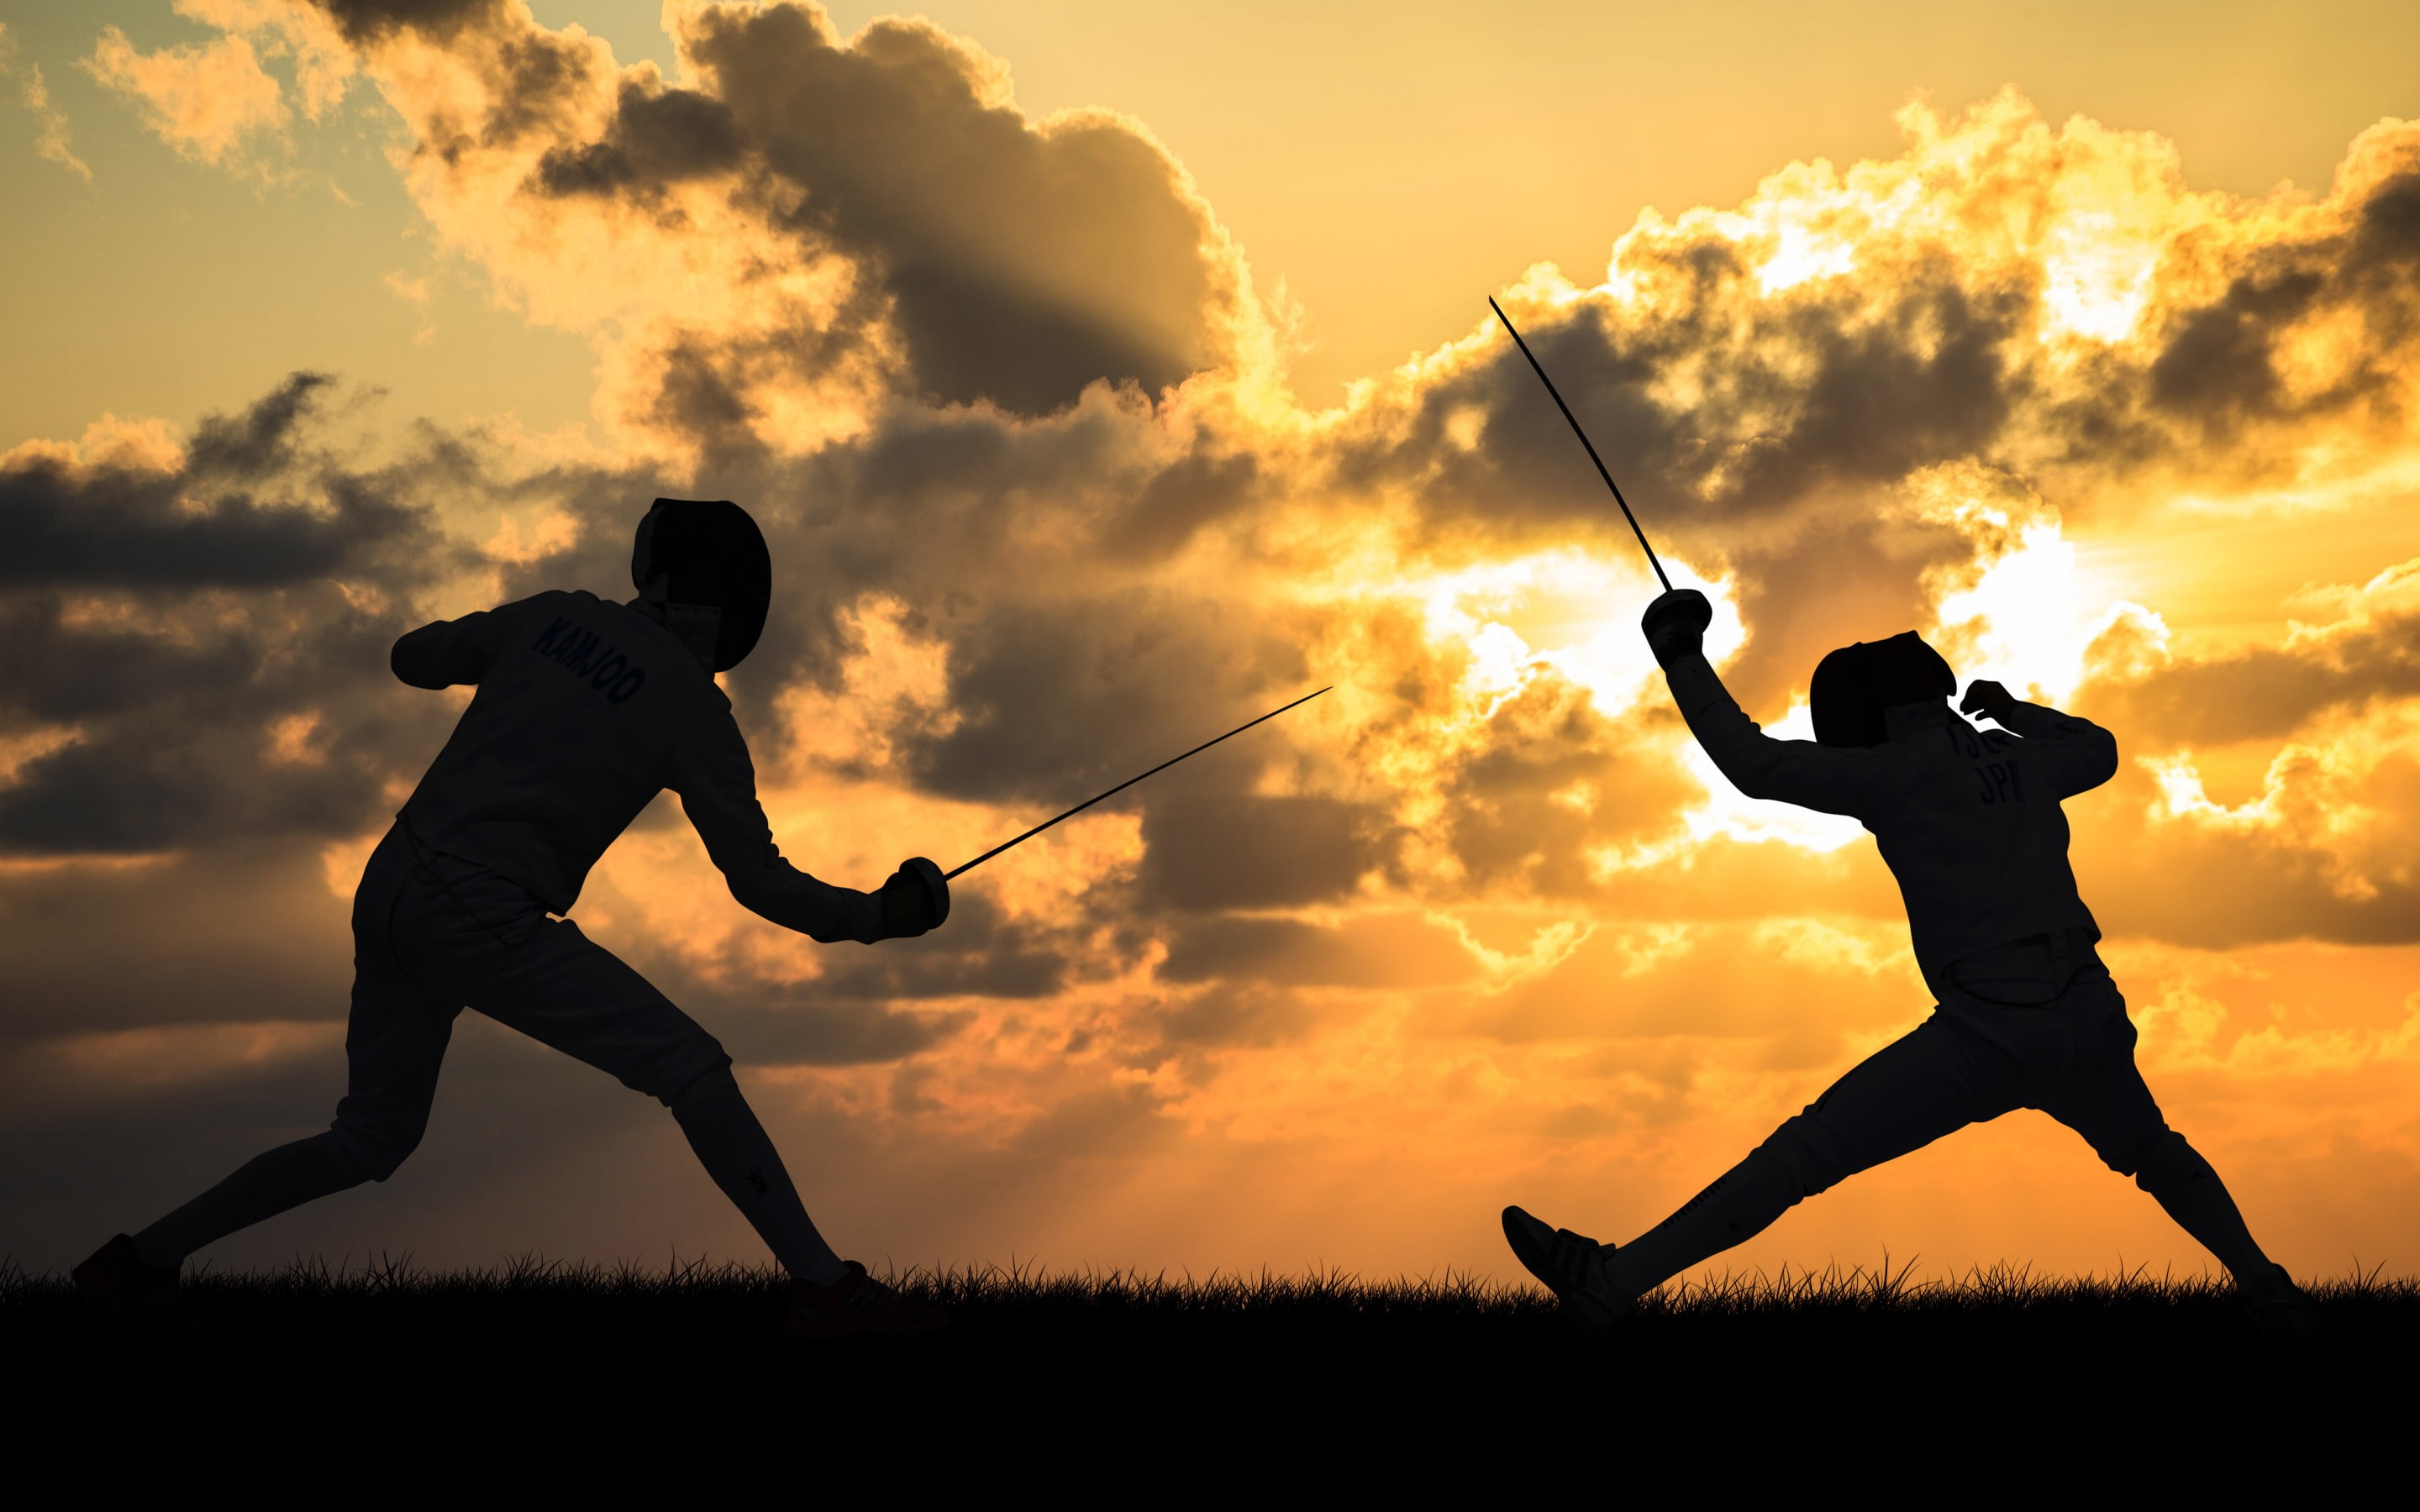 Fencing, two person fencing silhouette, Sports, Other, sunset